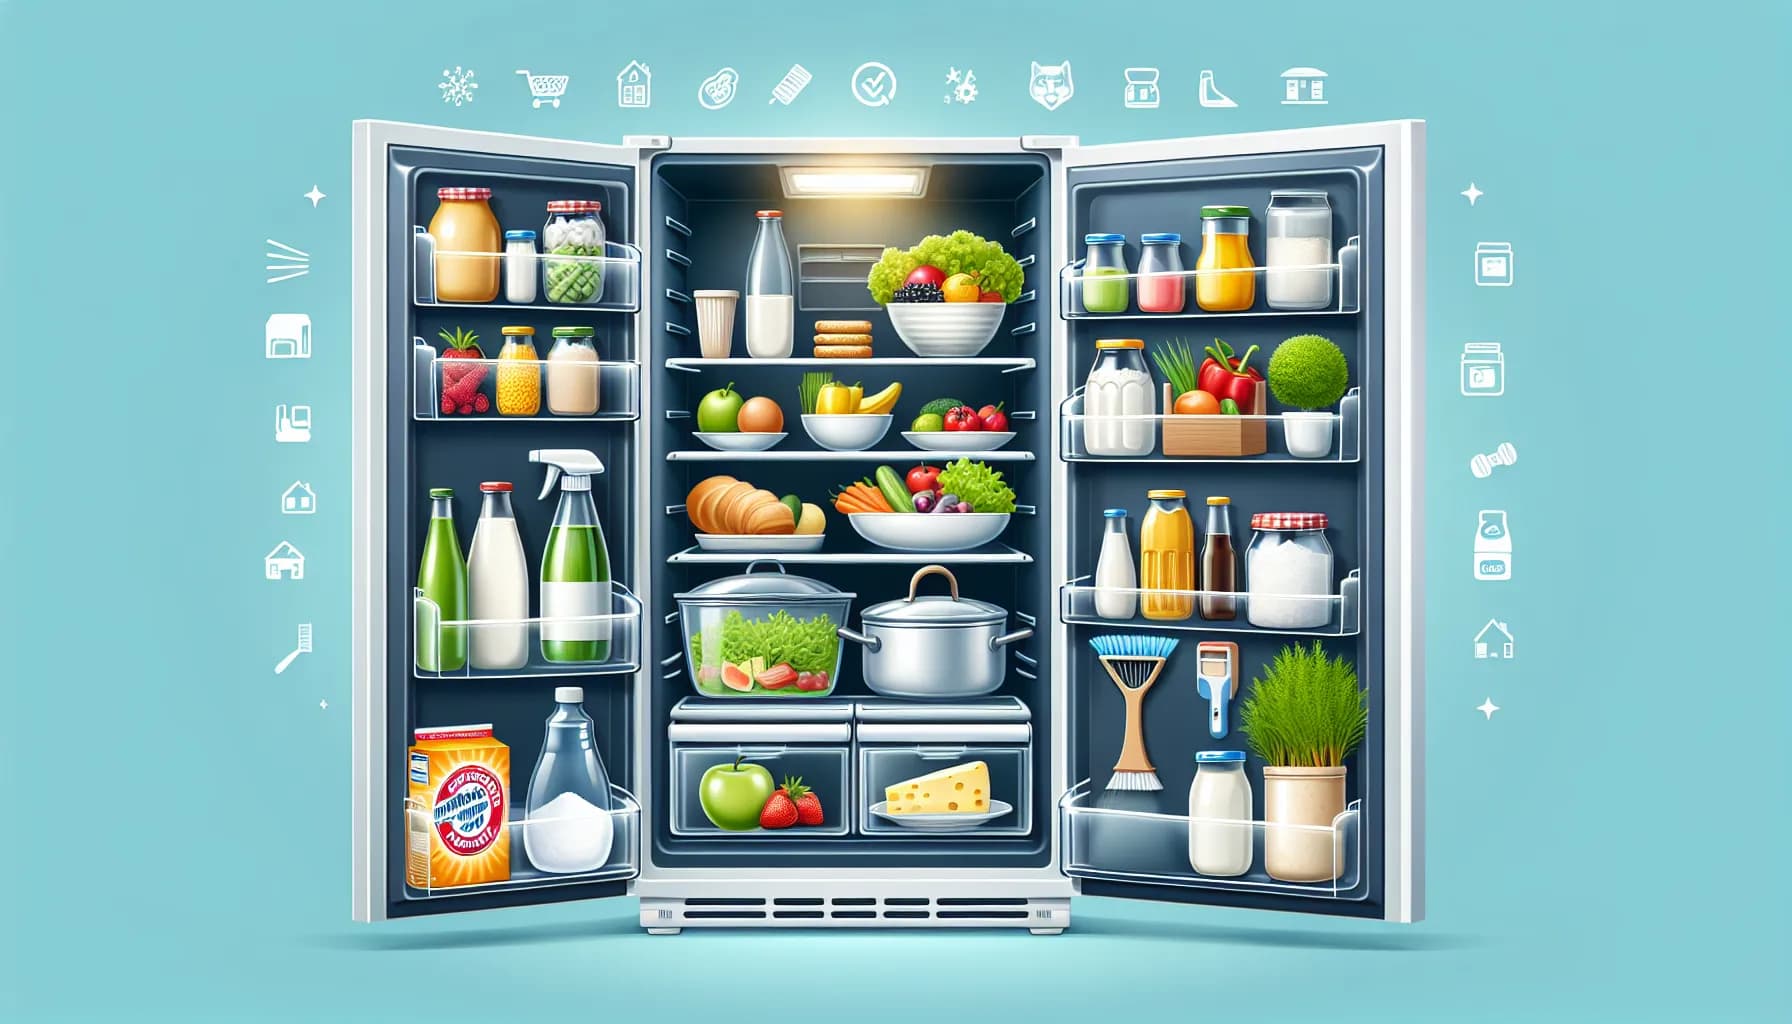 Neatly organized refrigerator with fresh groceries, clear glass shelves, and preventive cleaning icons.